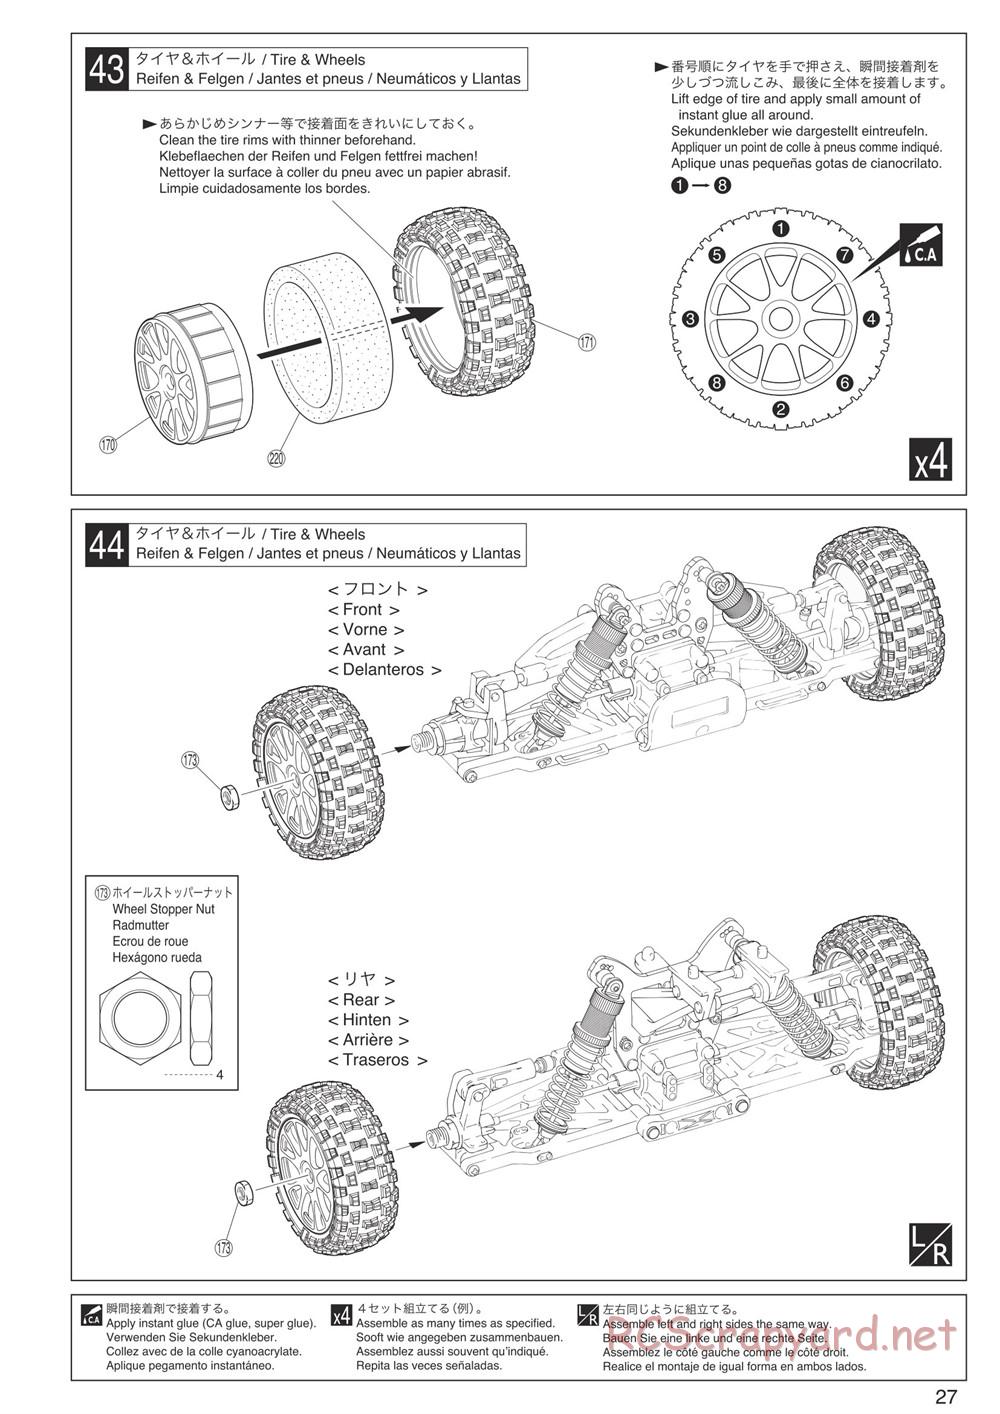 Kyosho - Inferno Neo 3.0 - Manual - Page 26